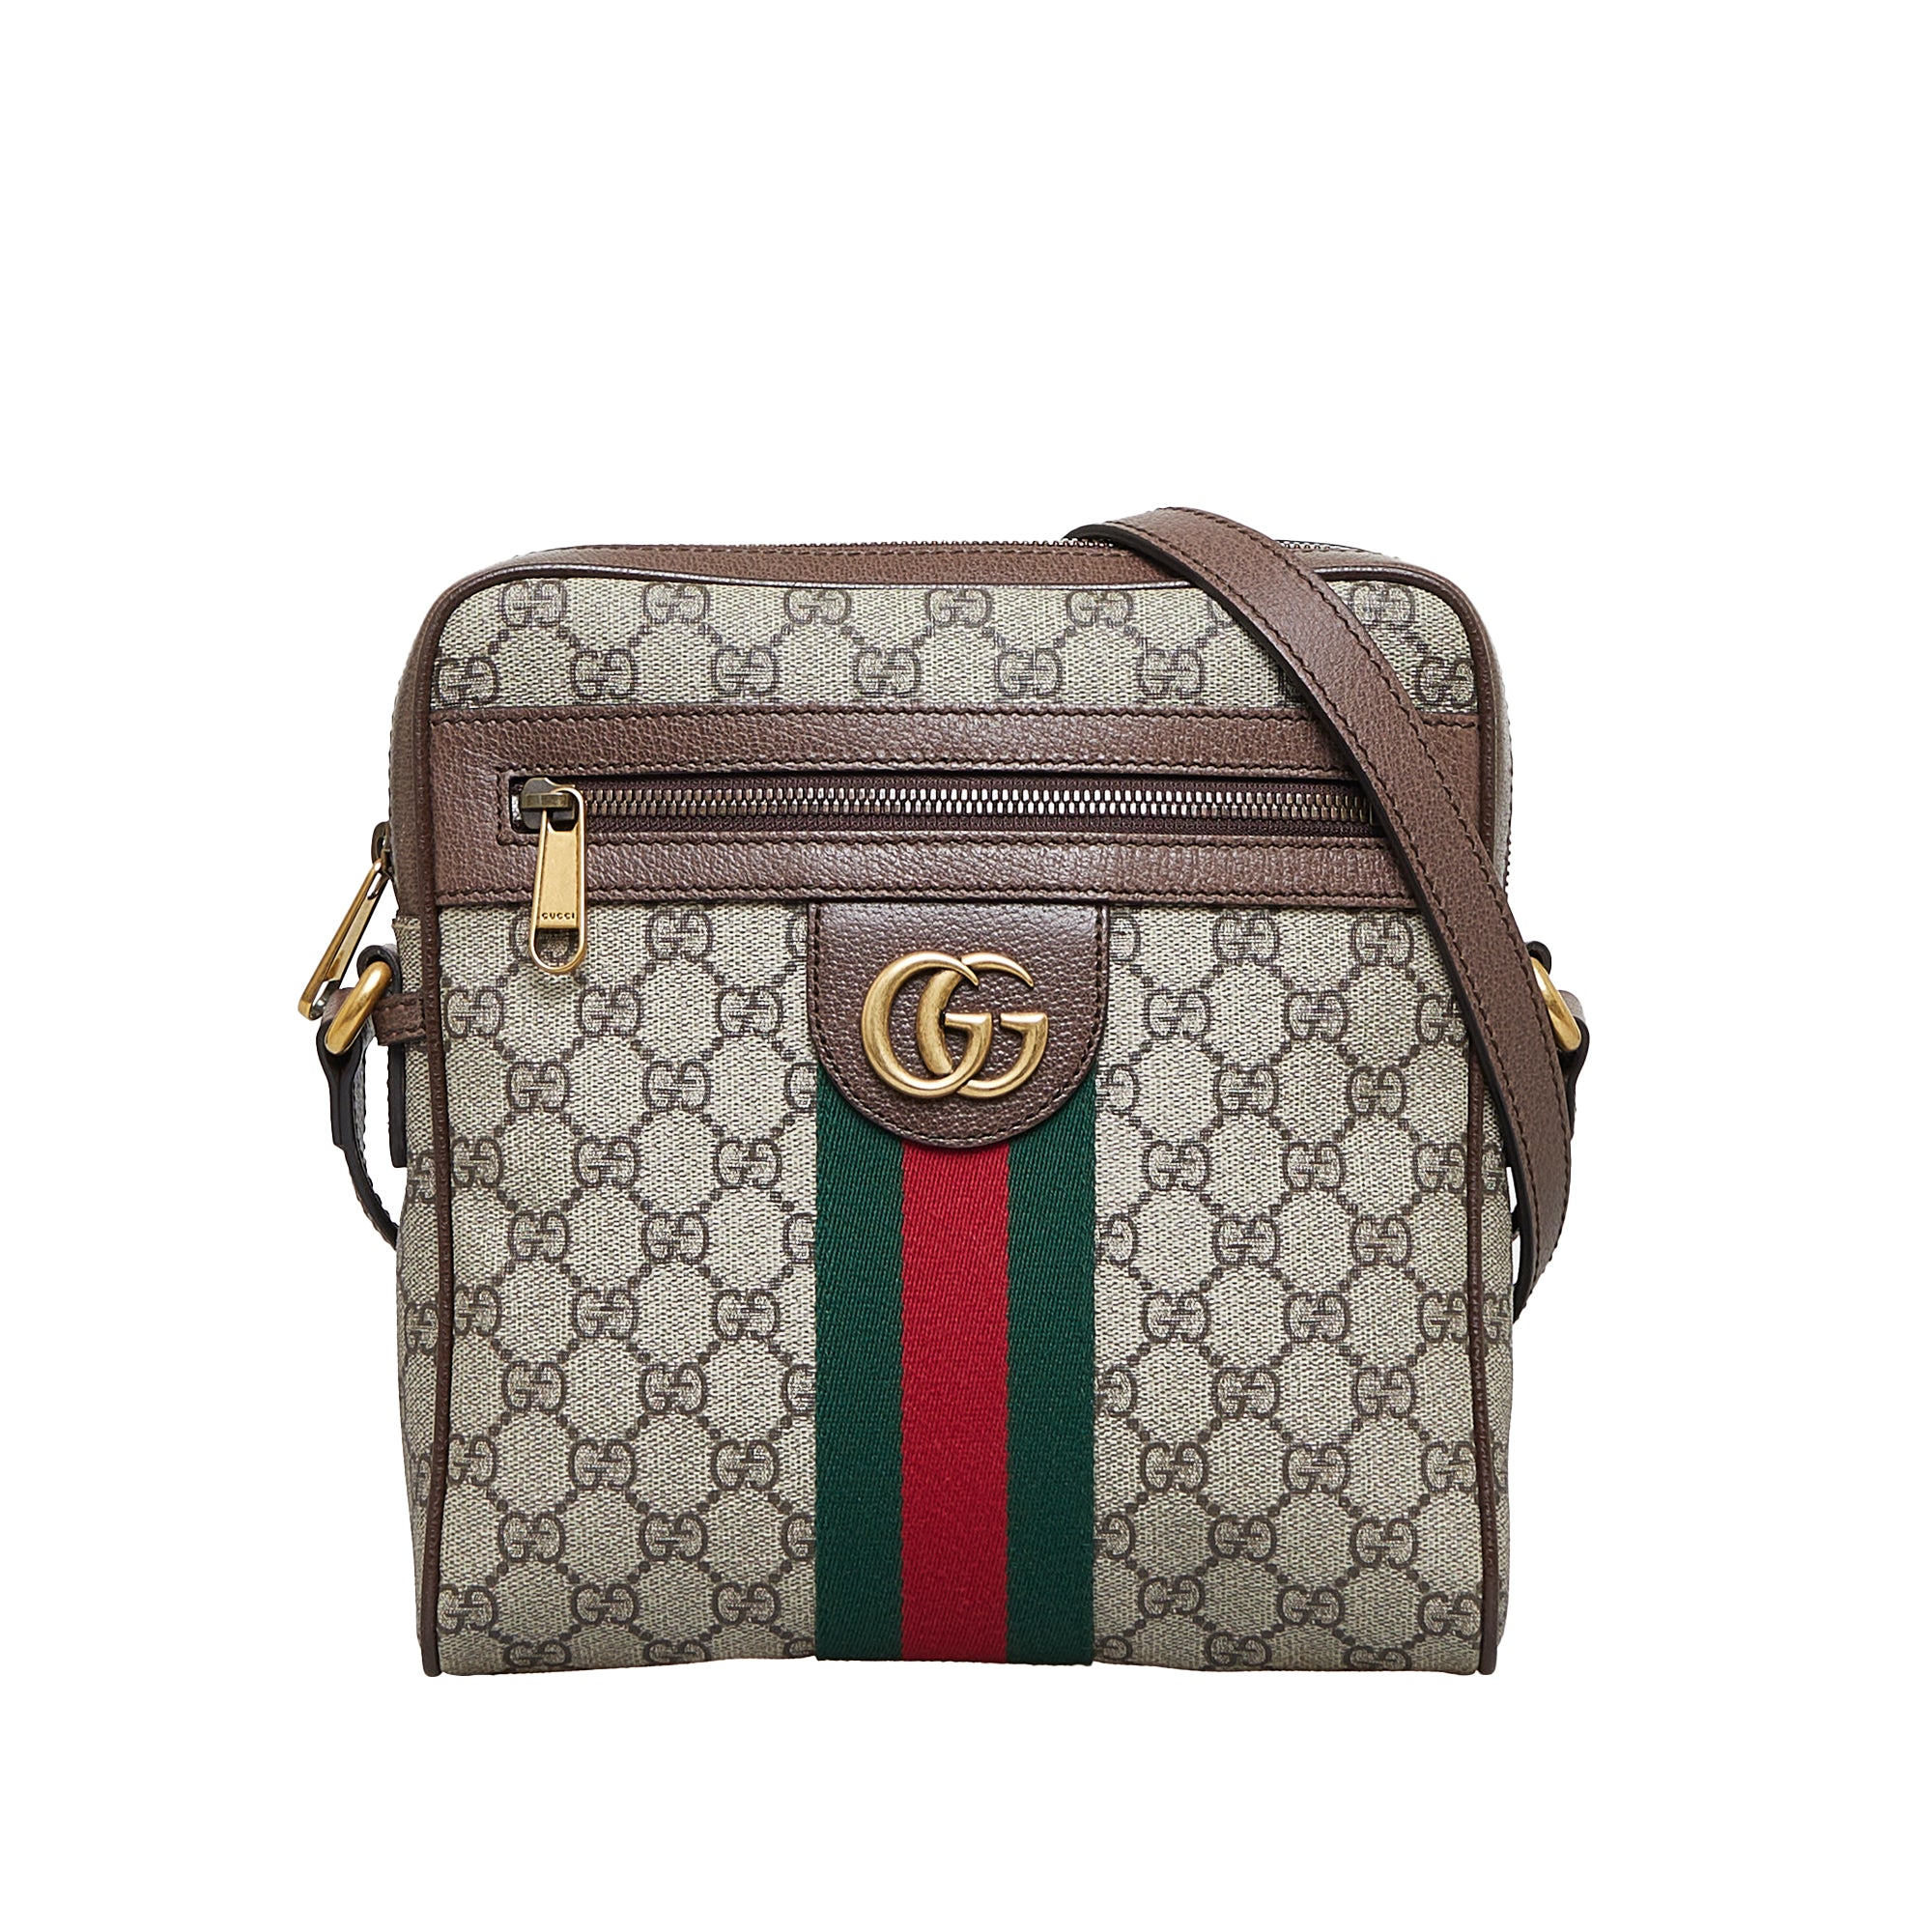 10 Best Designer Phone Cases : Gucci, Dior, and More  Bags, Leather  crossbody bag small, Small shoulder bag